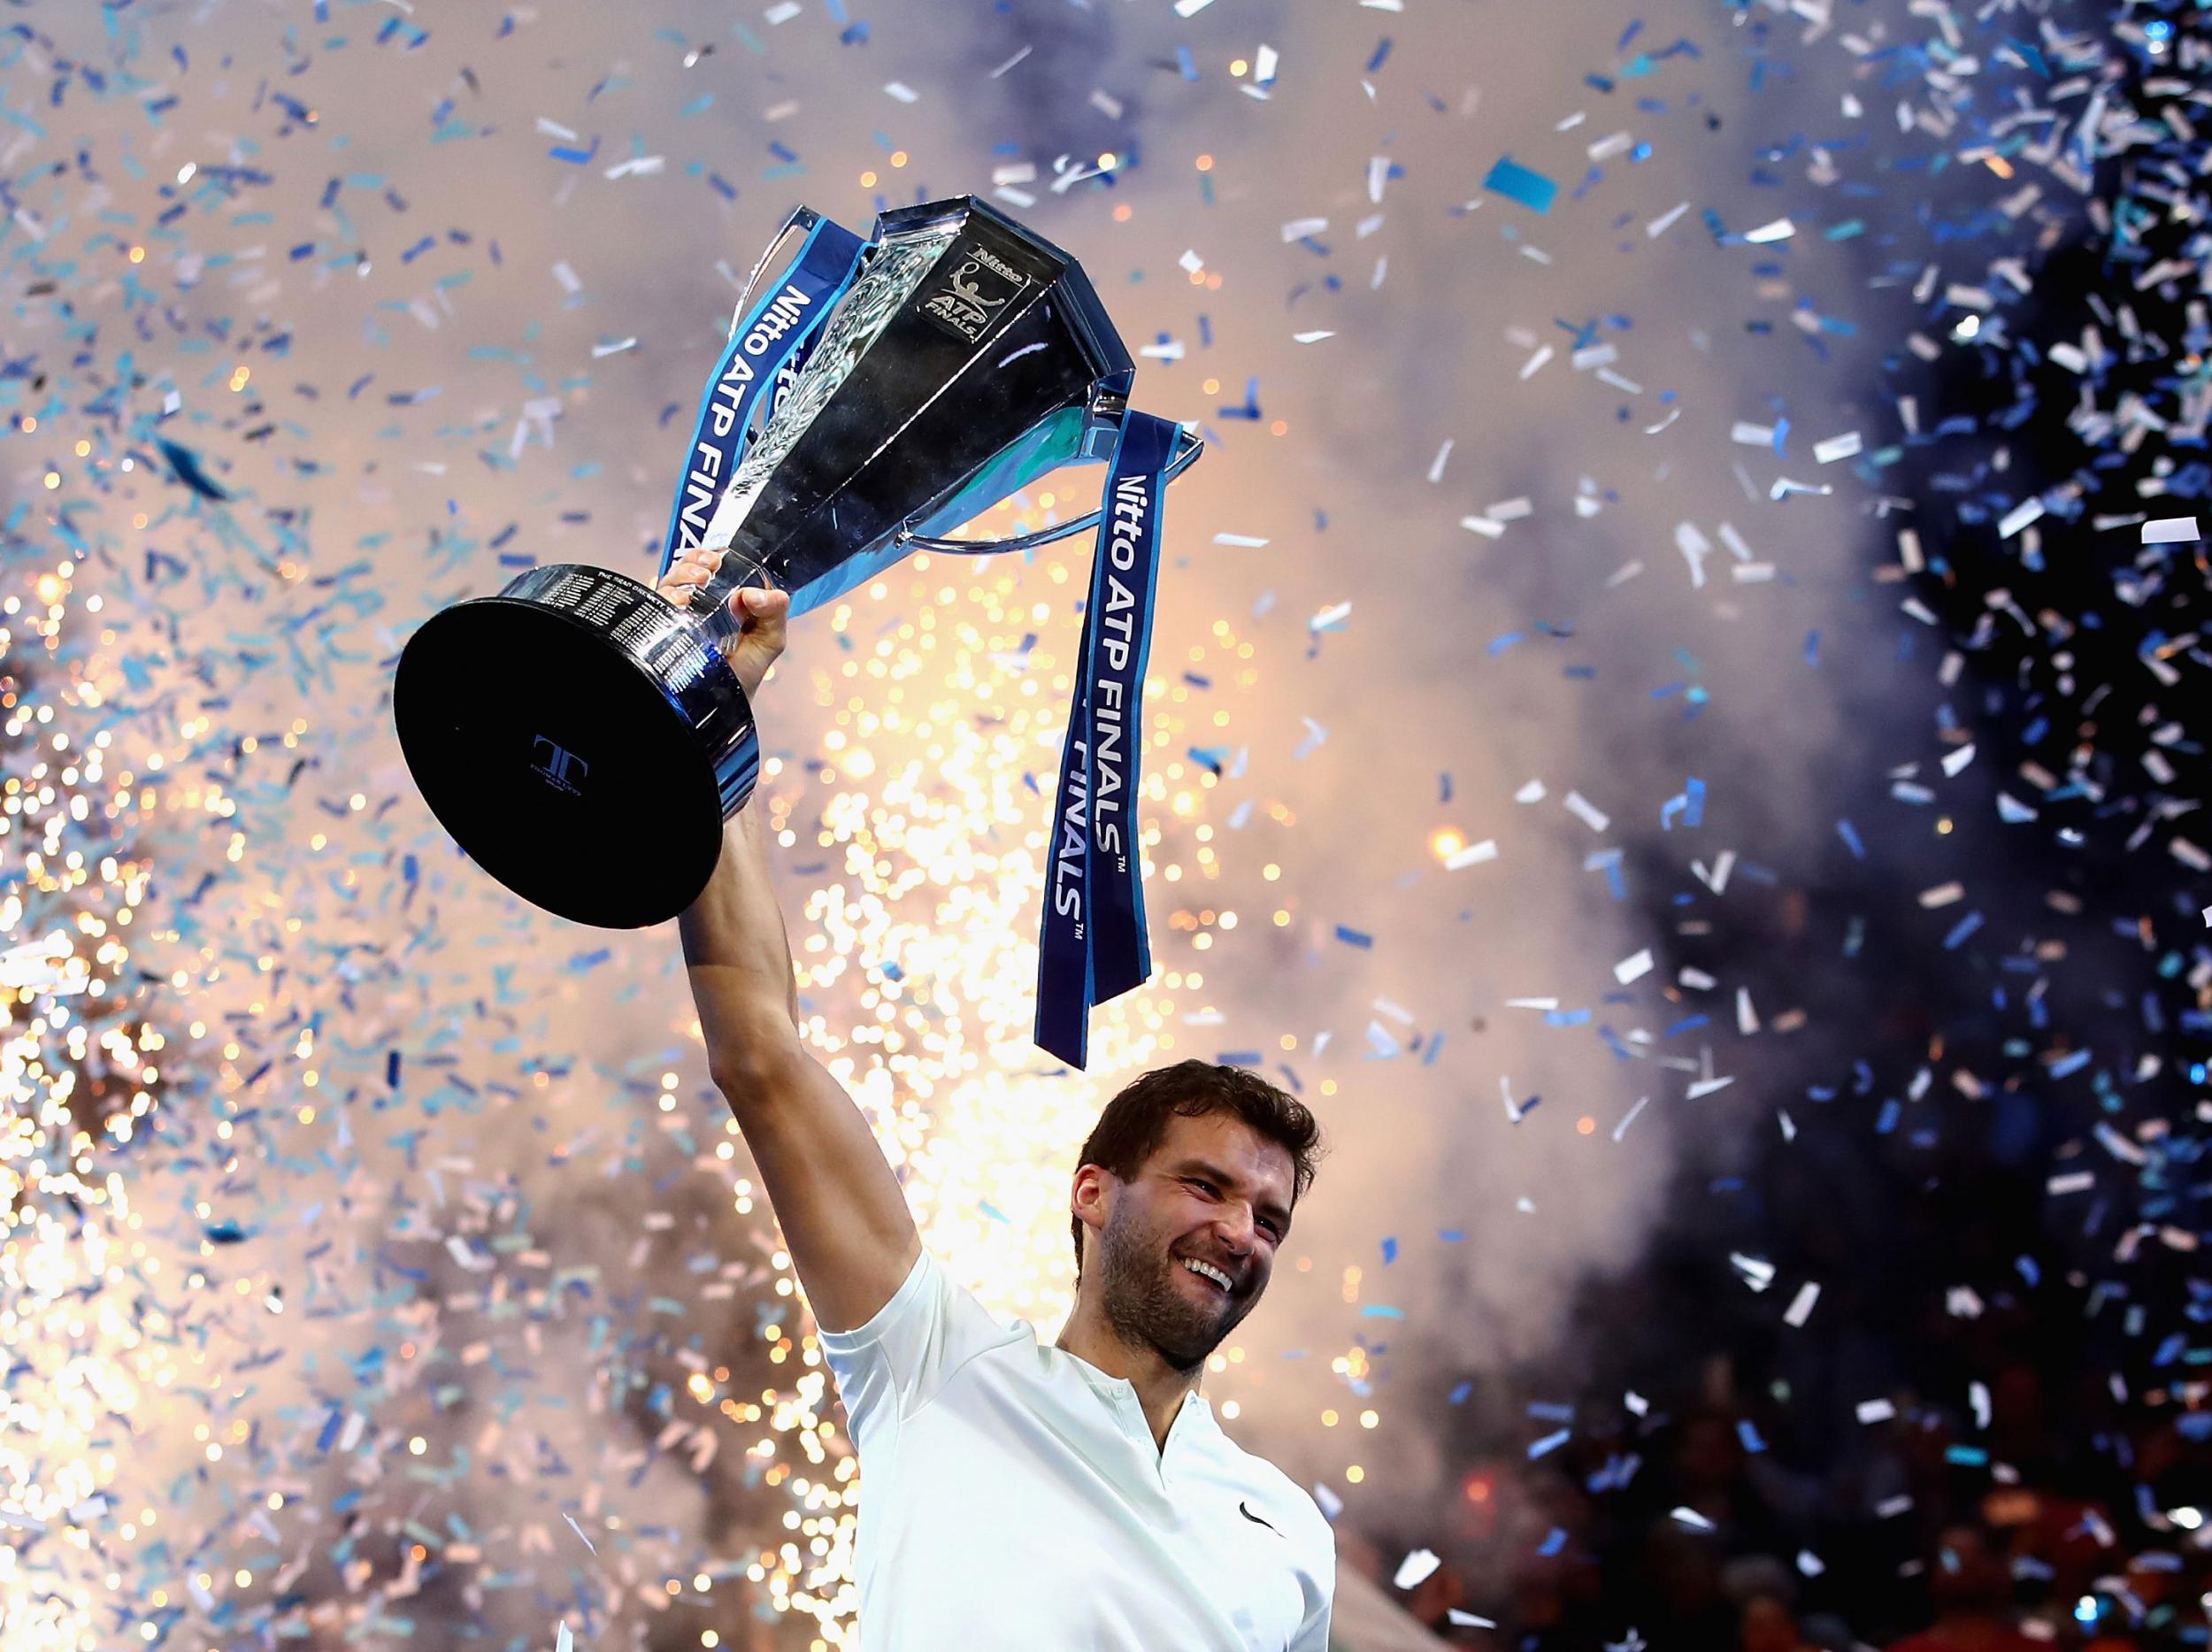 Grigor Dimitrov outlasted Goffin to win in three sets at The O2